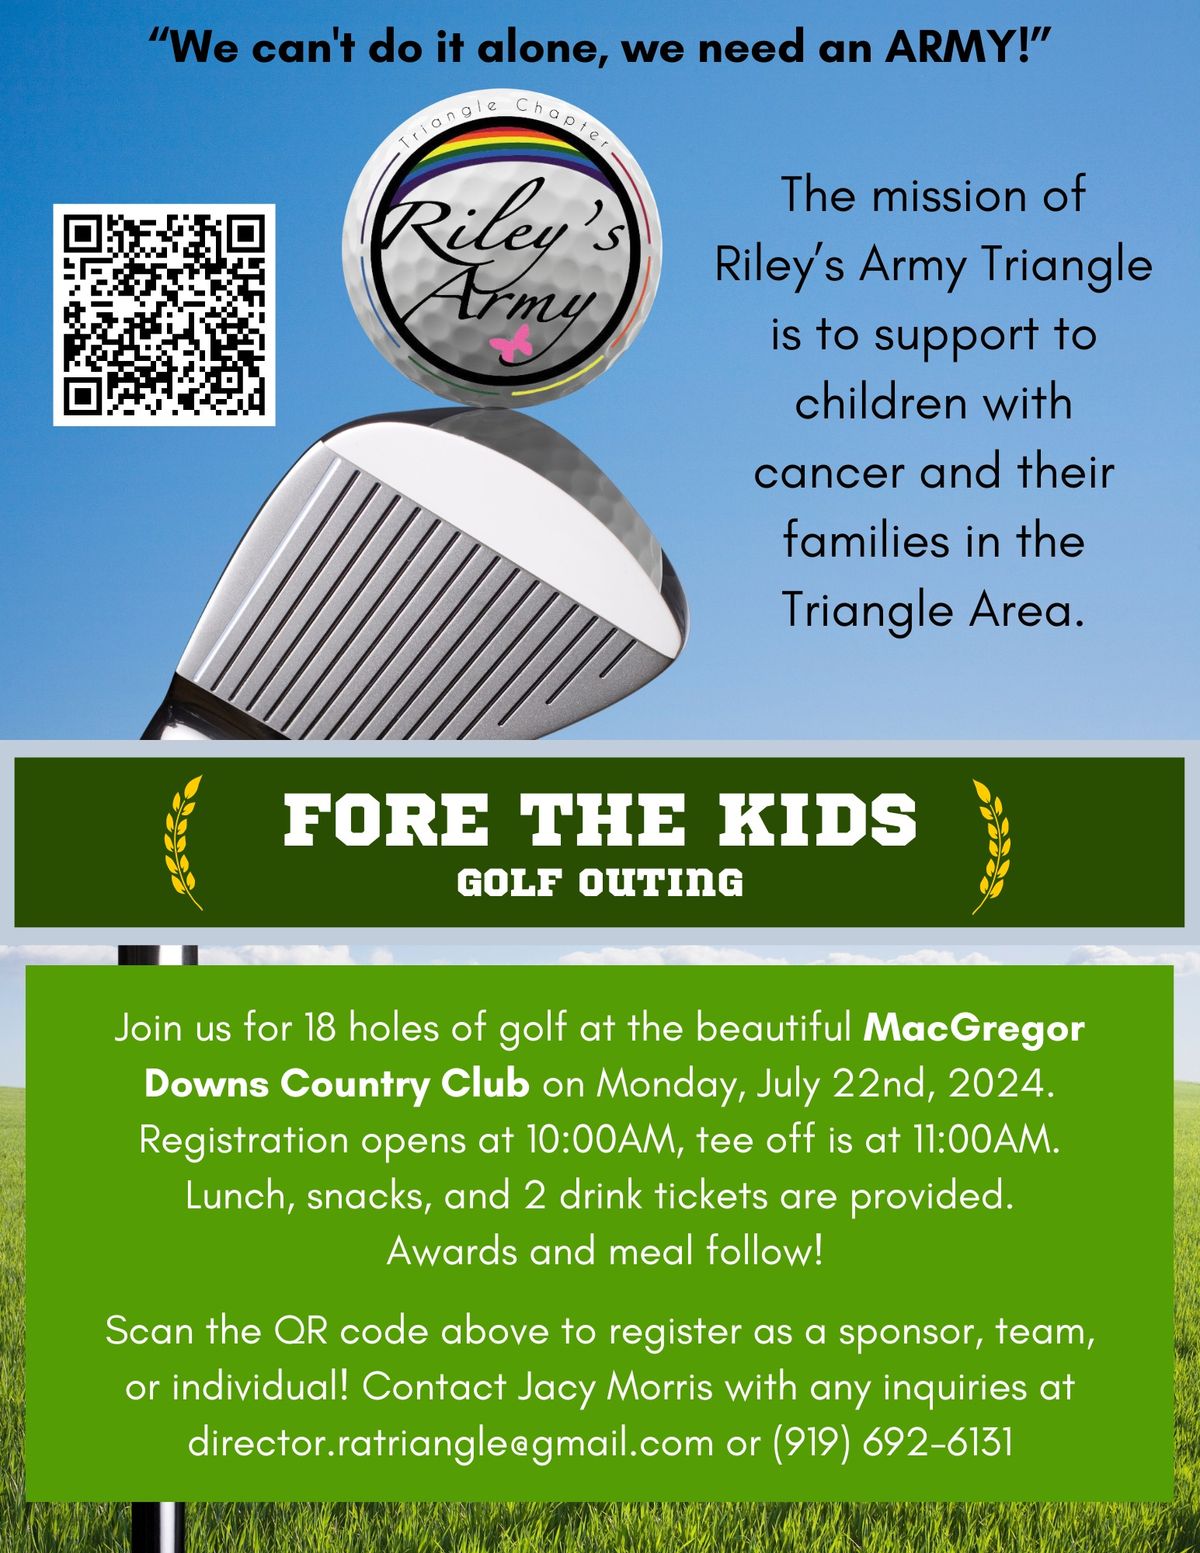 Fore The Kids Golf Outing - Riley's Army Triangle